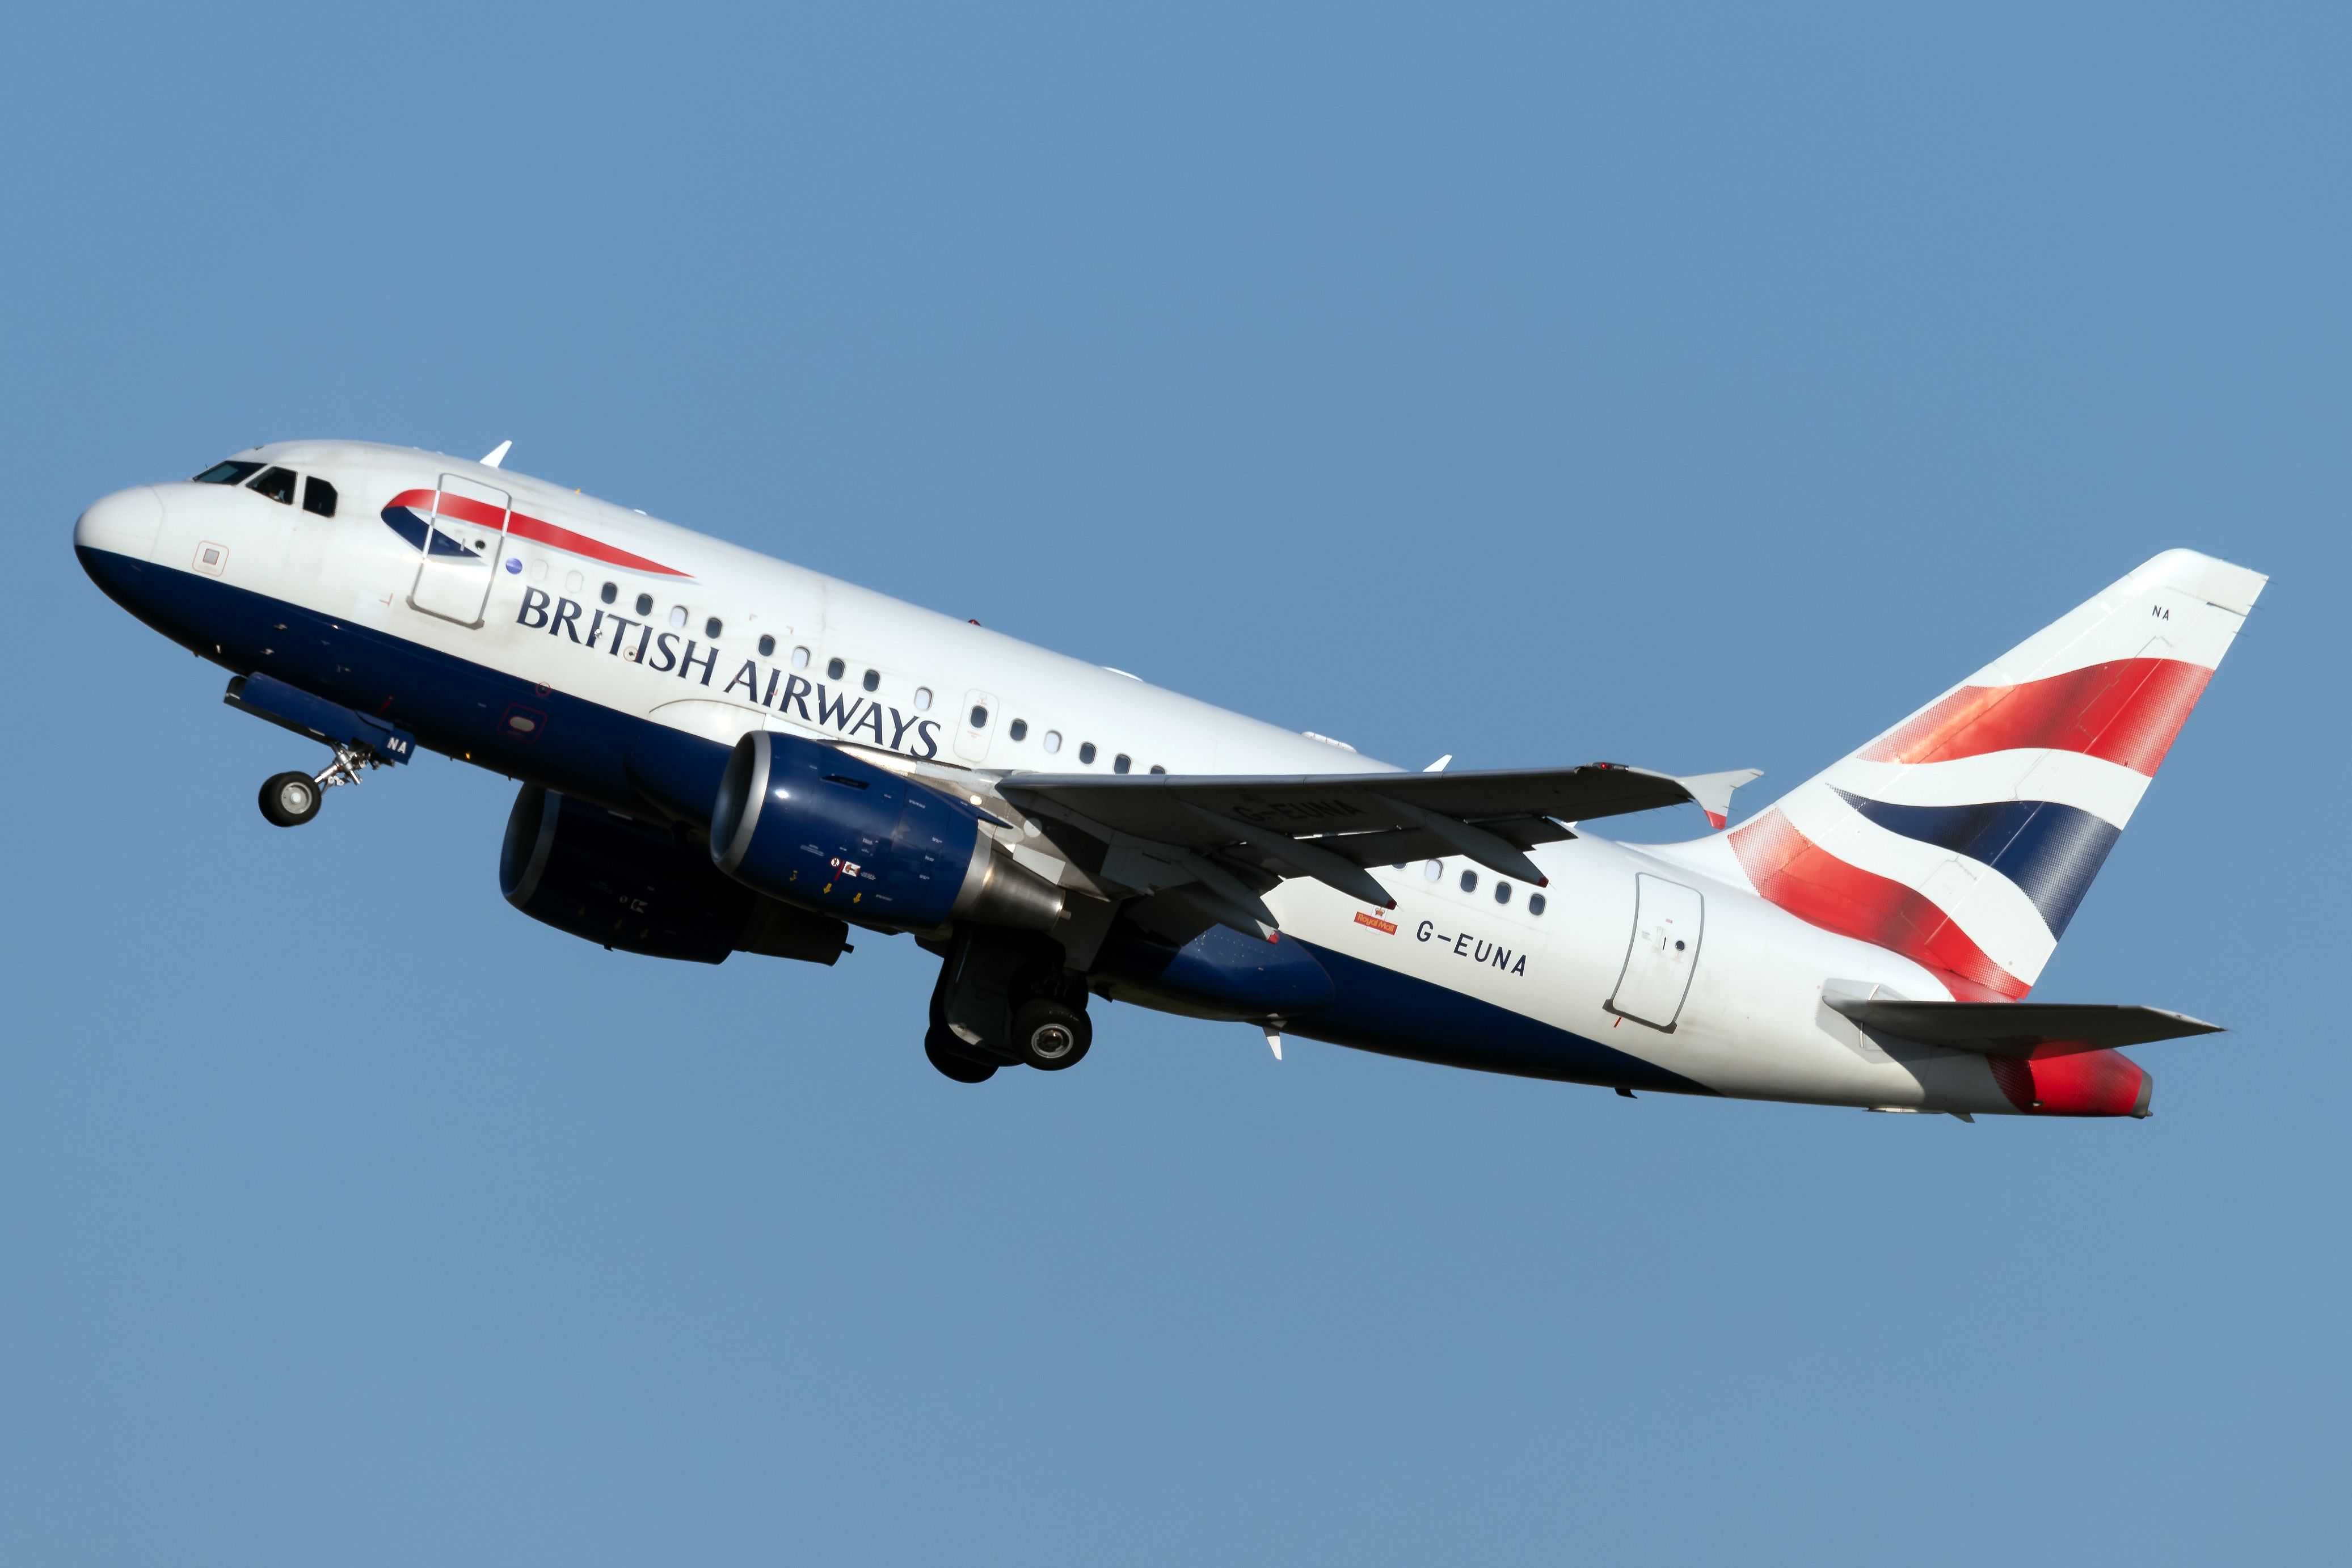 A British Airways Boeing A318 flying in the sky.